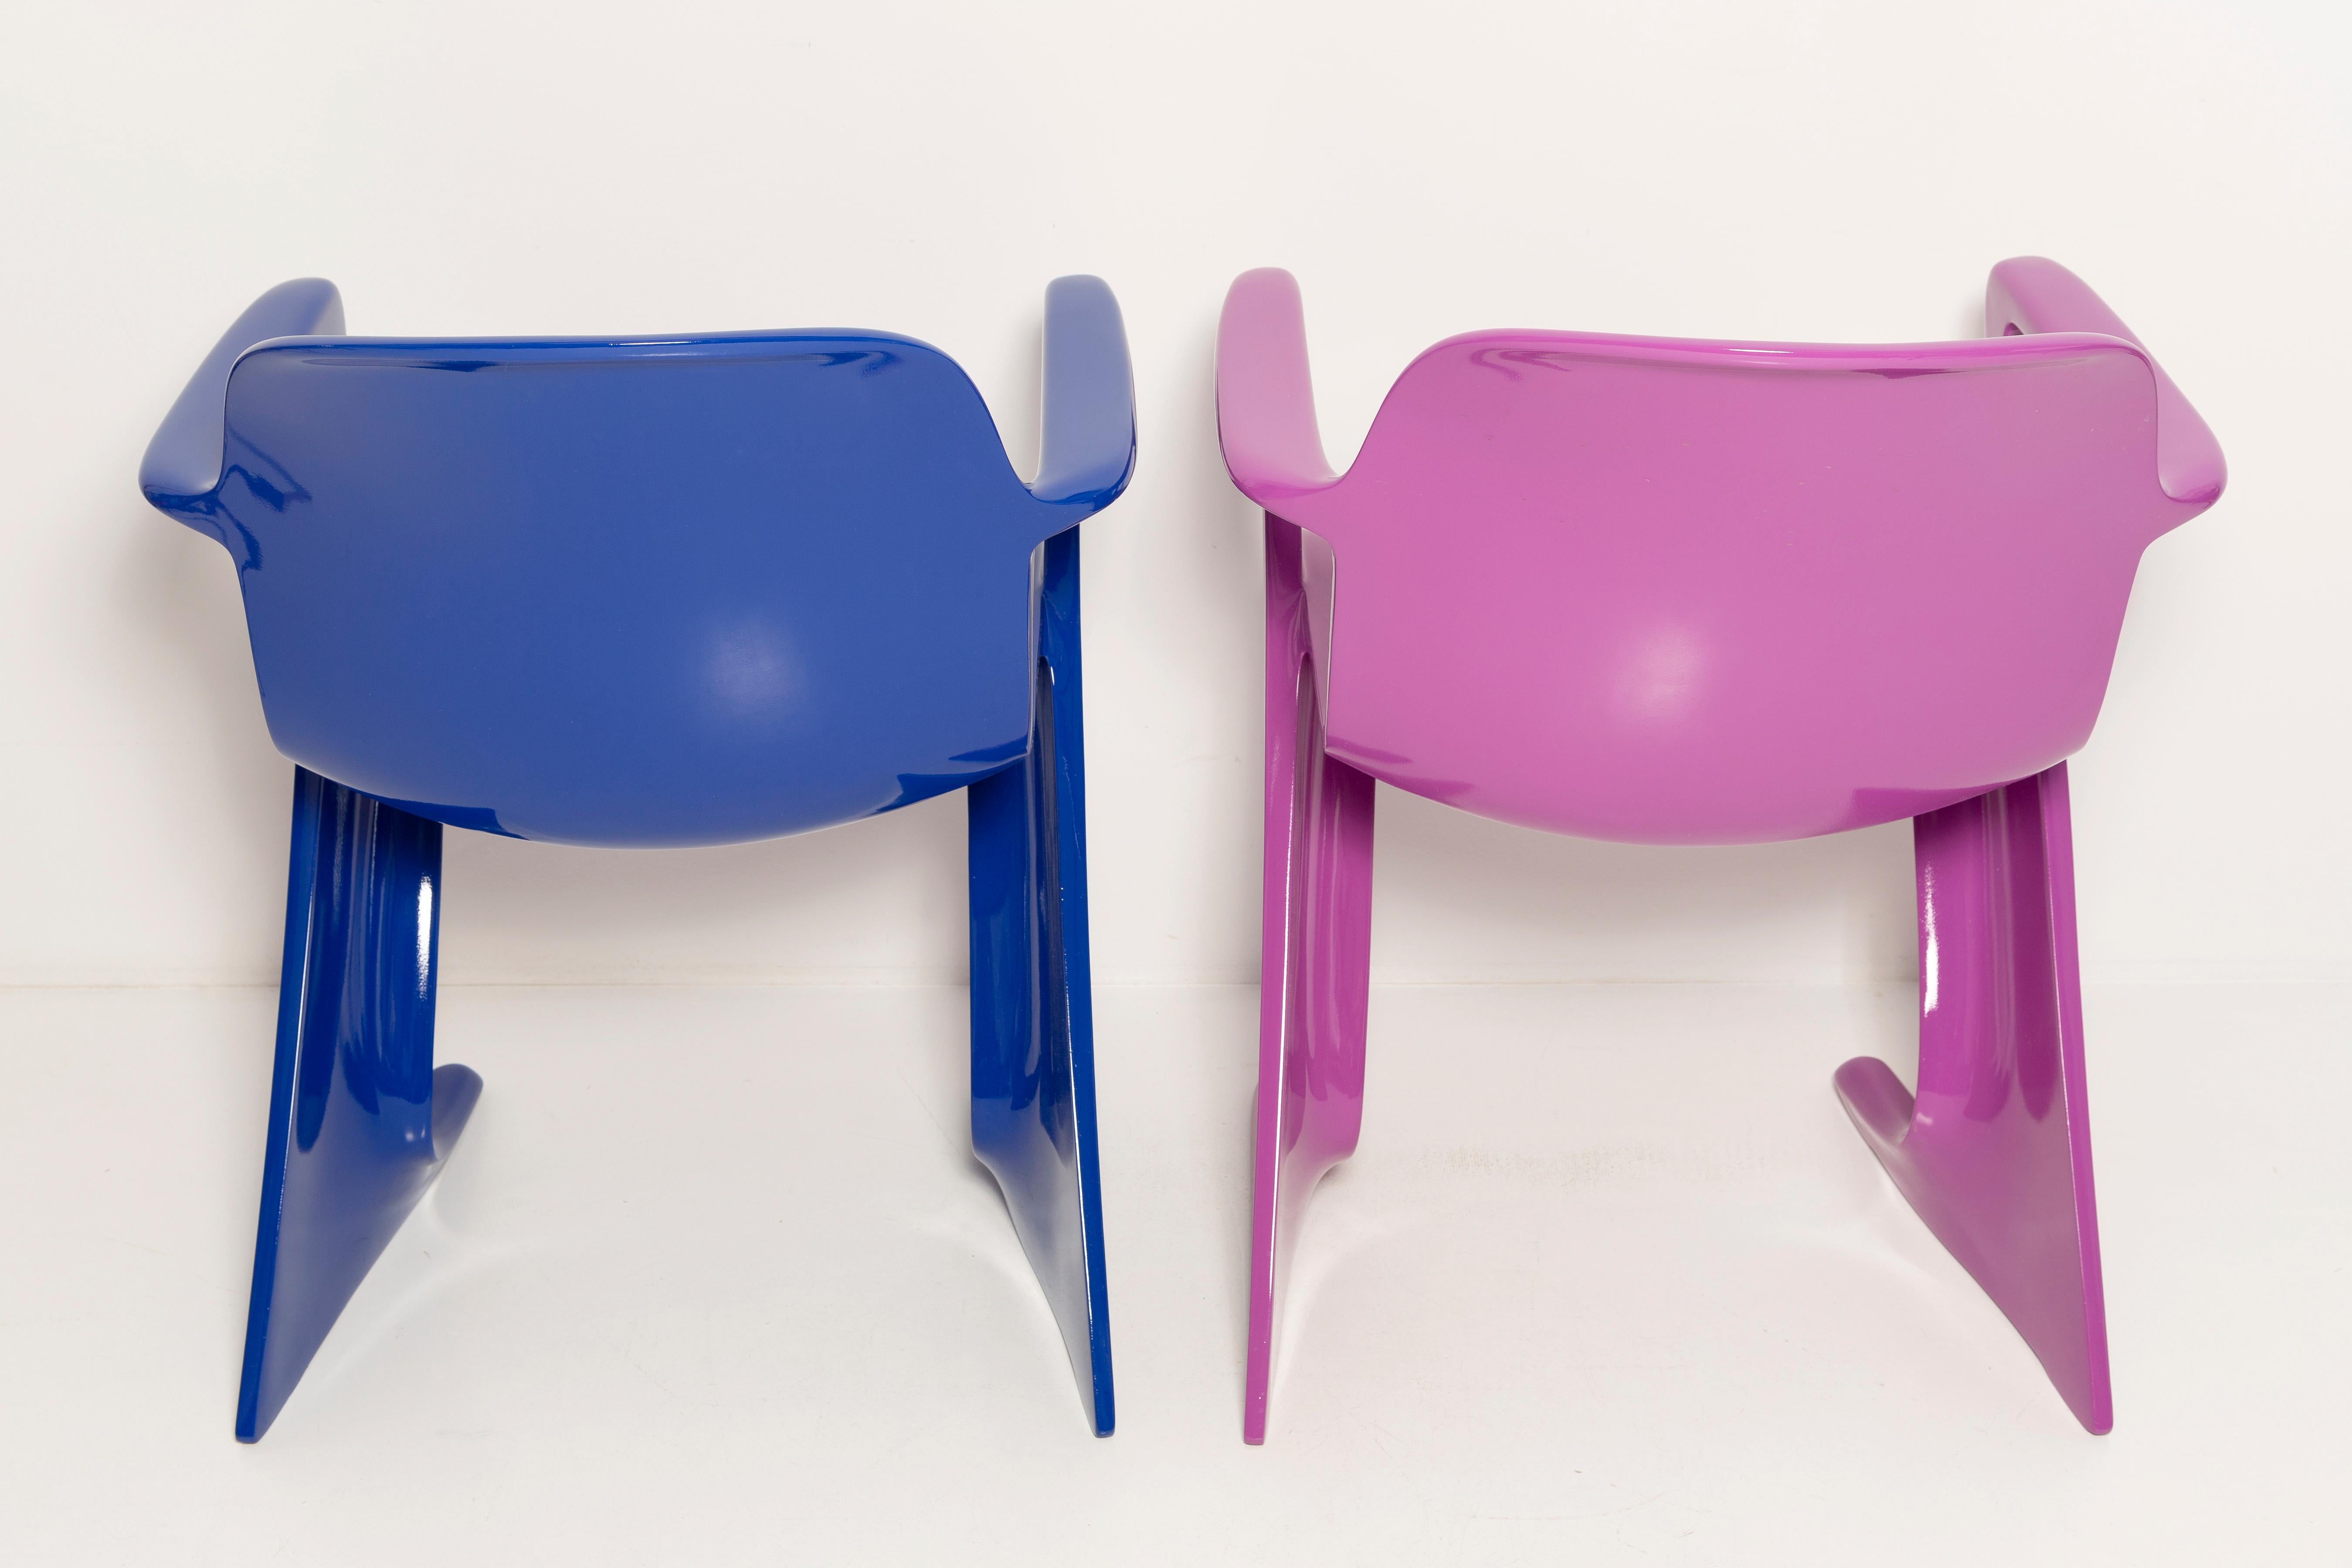 Two Mid-Century Purple and Blue Kangaroo Chairs, Ernst Moeckl, Germany, 1968 For Sale 3